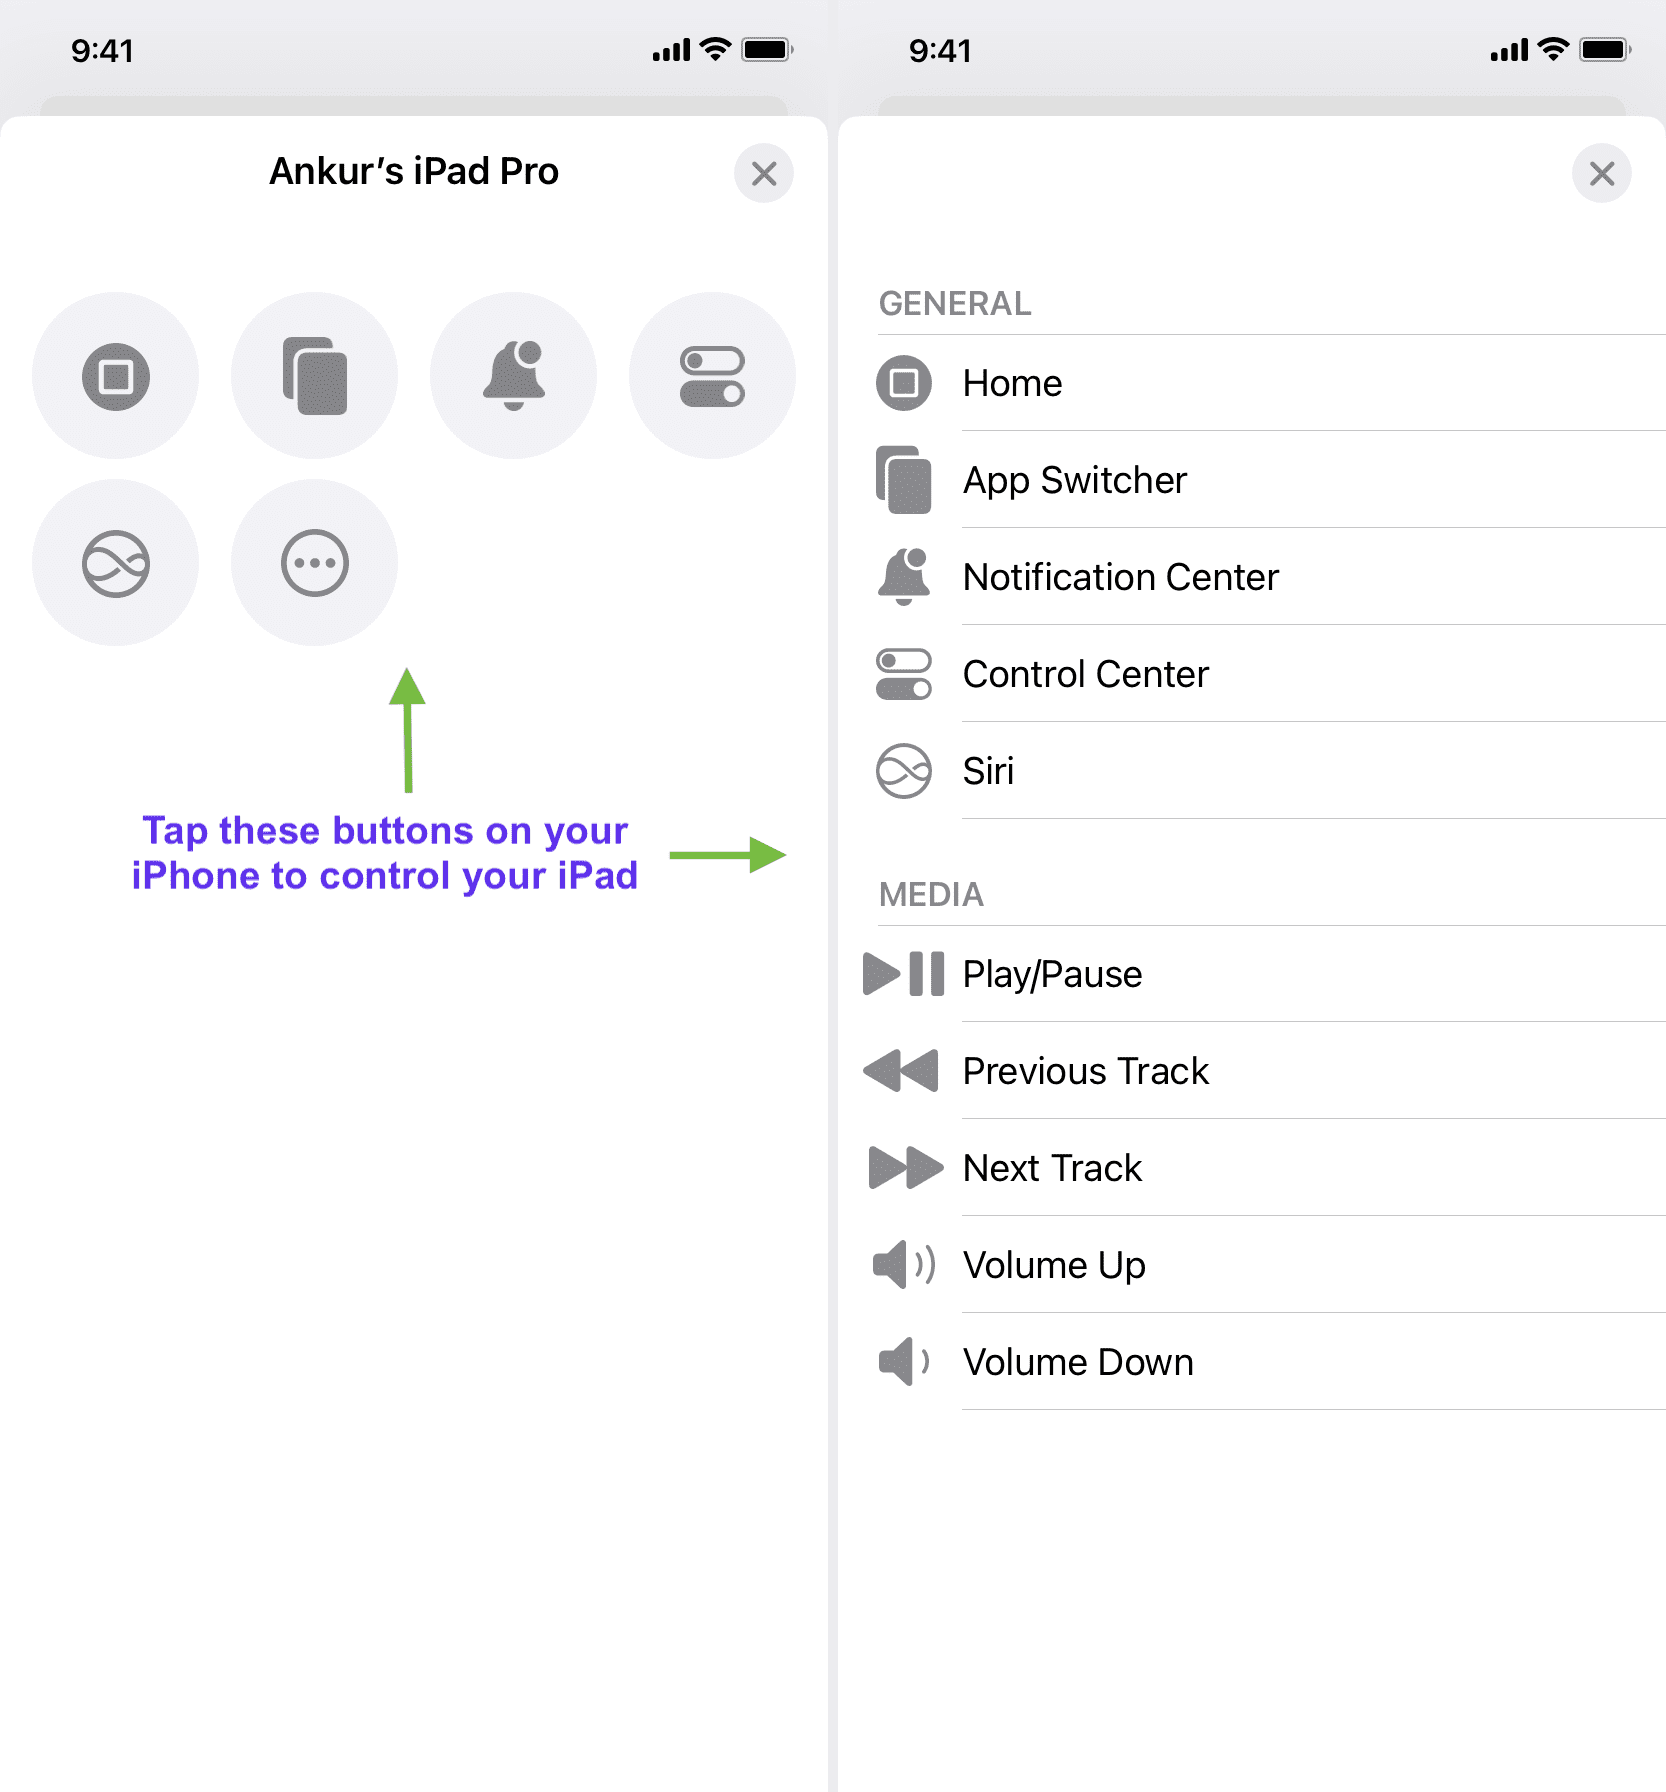 Options to wirelessly Control Nearby Devices like iPad on iPhone